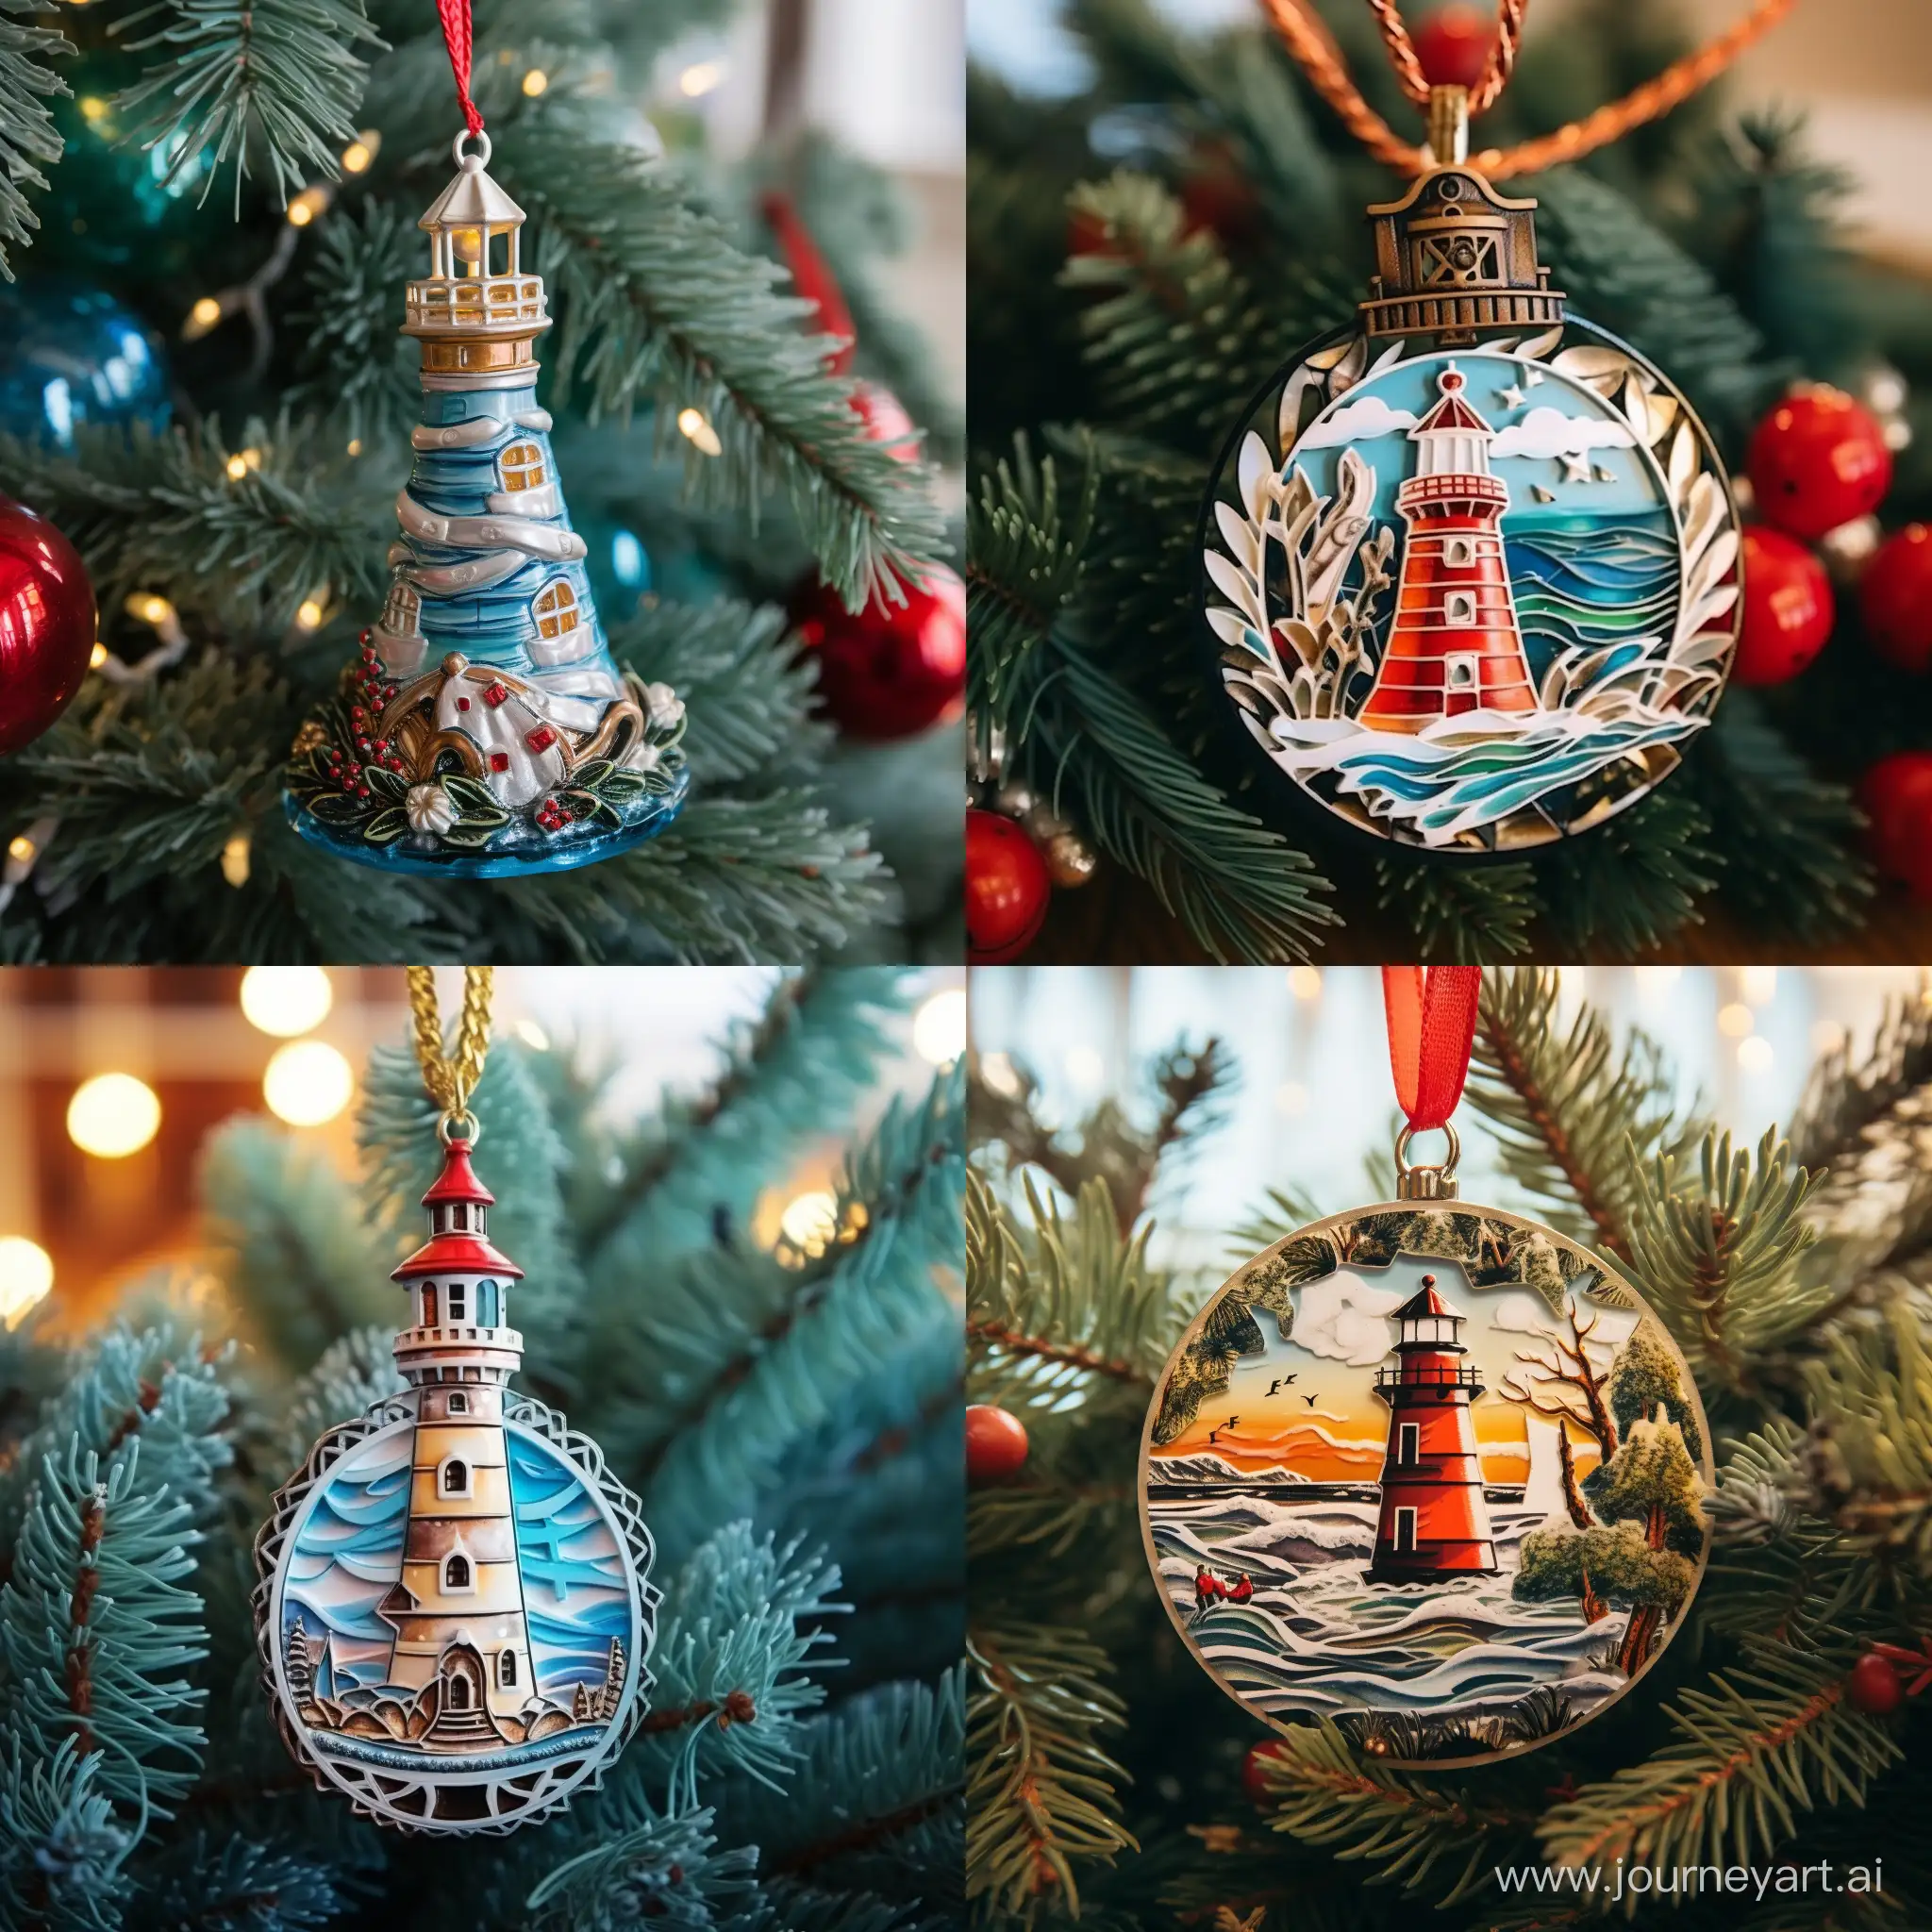 Festive-Lighthouse-Ornament-Adorning-Christmas-Tree-with-Sparkling-Garlands